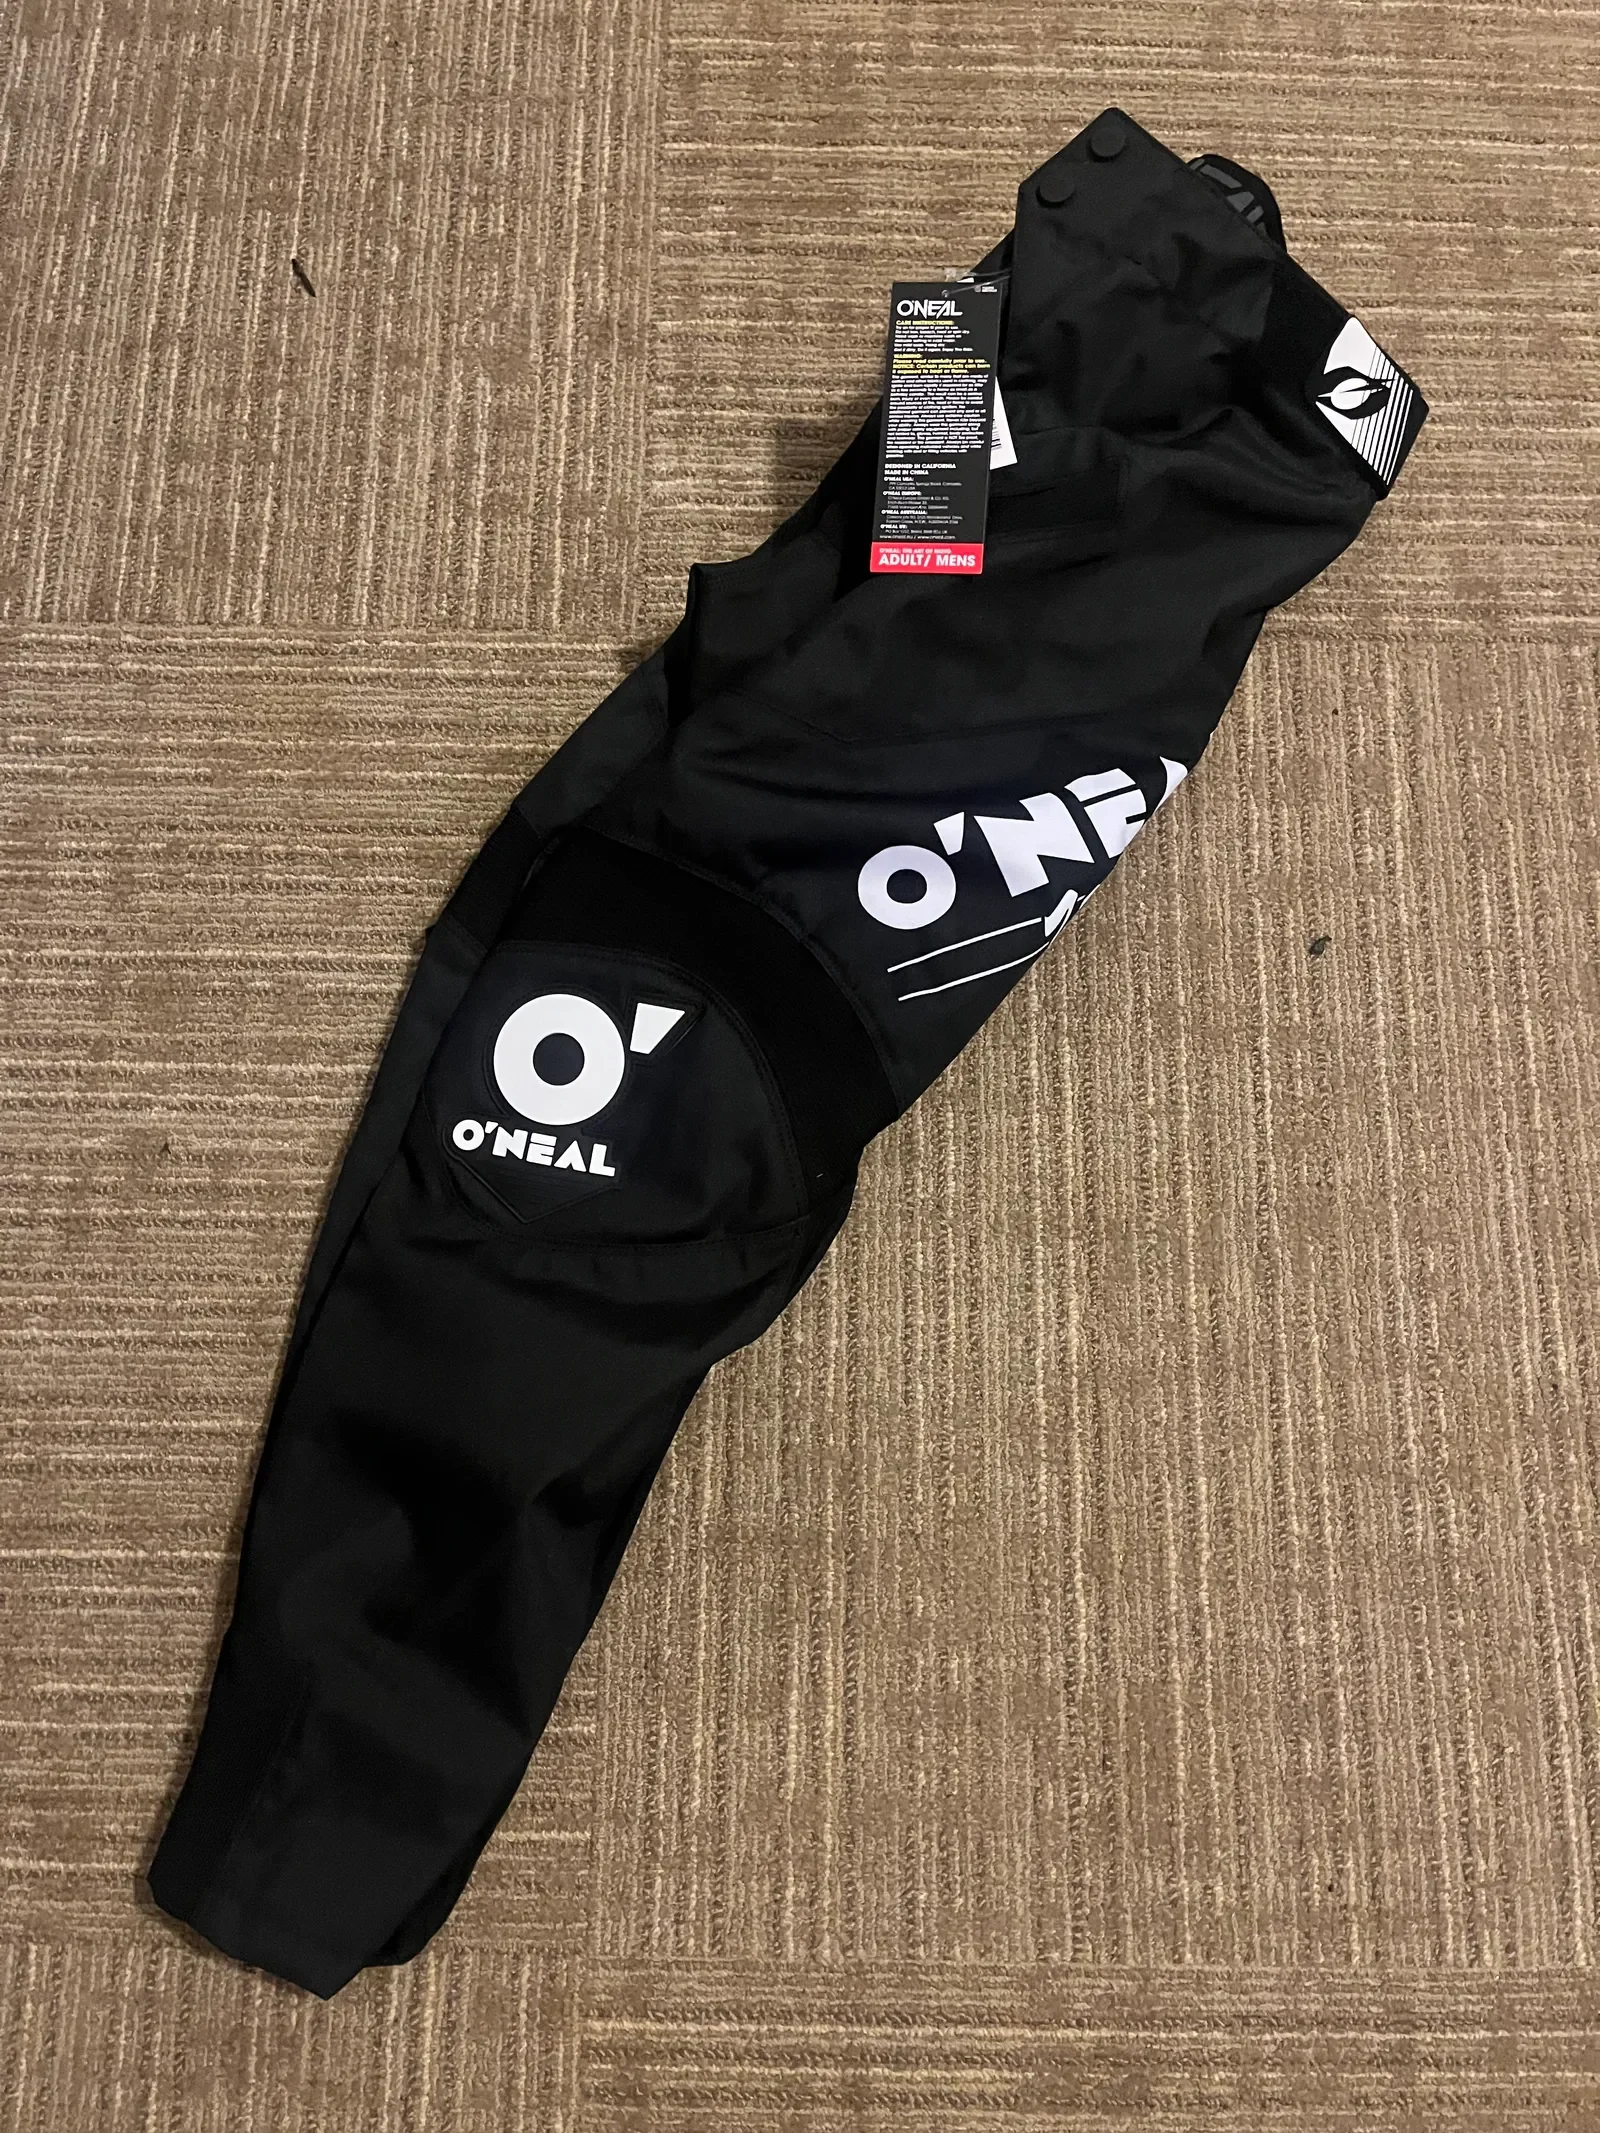 Oneal Pants, Size 28. Brand New!!